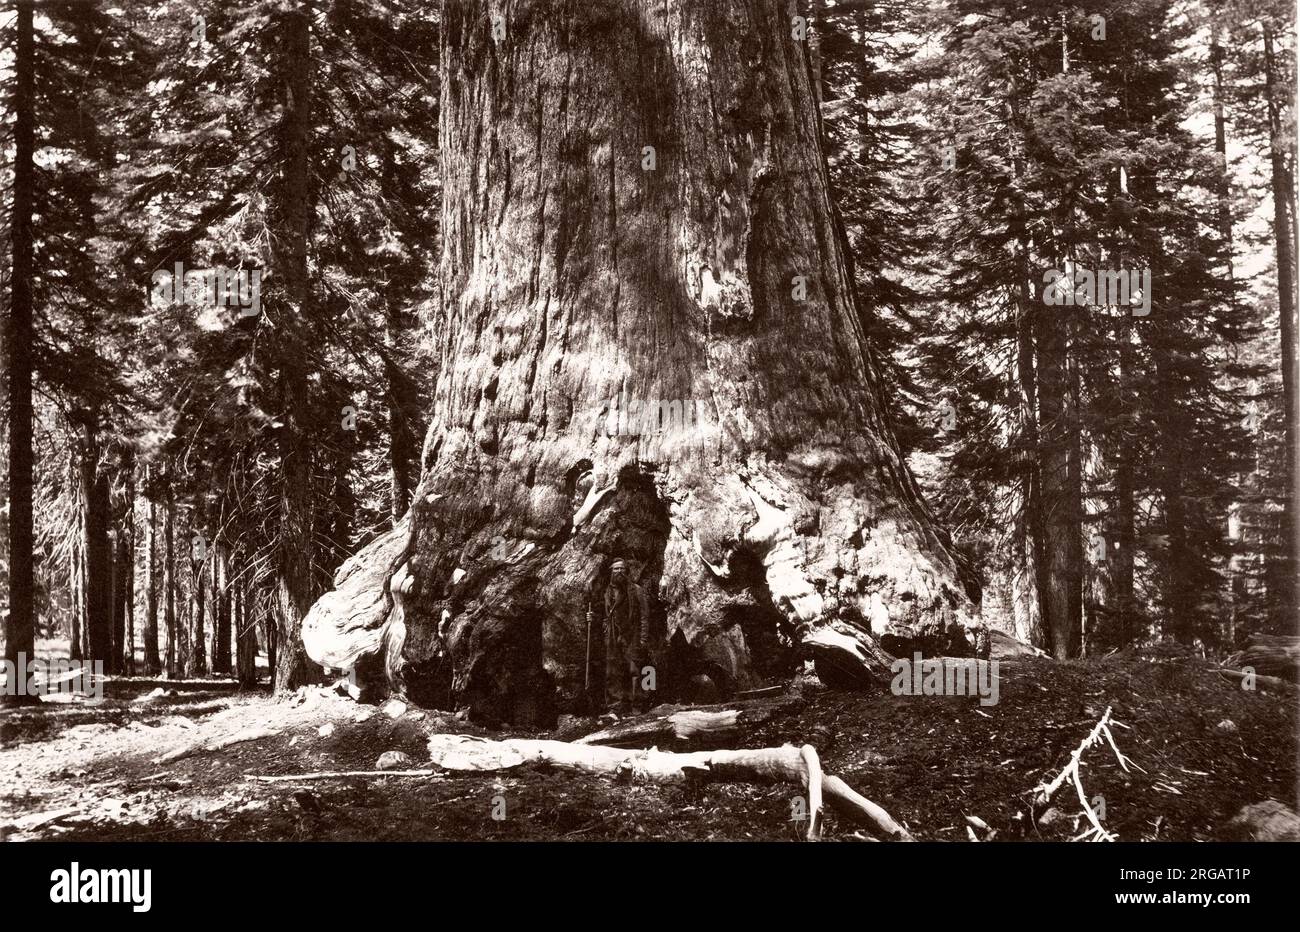 19th century vintage photograph - Grizzle giant, giant sequoia tree, Mariposa Grove,  Wawona, California, United States, in the southernmost part of Yosemite National Park. In the foreground is Galen Clark (March 28, 1814 - March 24, 1910), the first European American to discover the Mariposa Grove, and is notable for his role in gaining legislation to protect Yosemite. For 24 years she served as Guardian of Yosemite National Park. Stock Photo